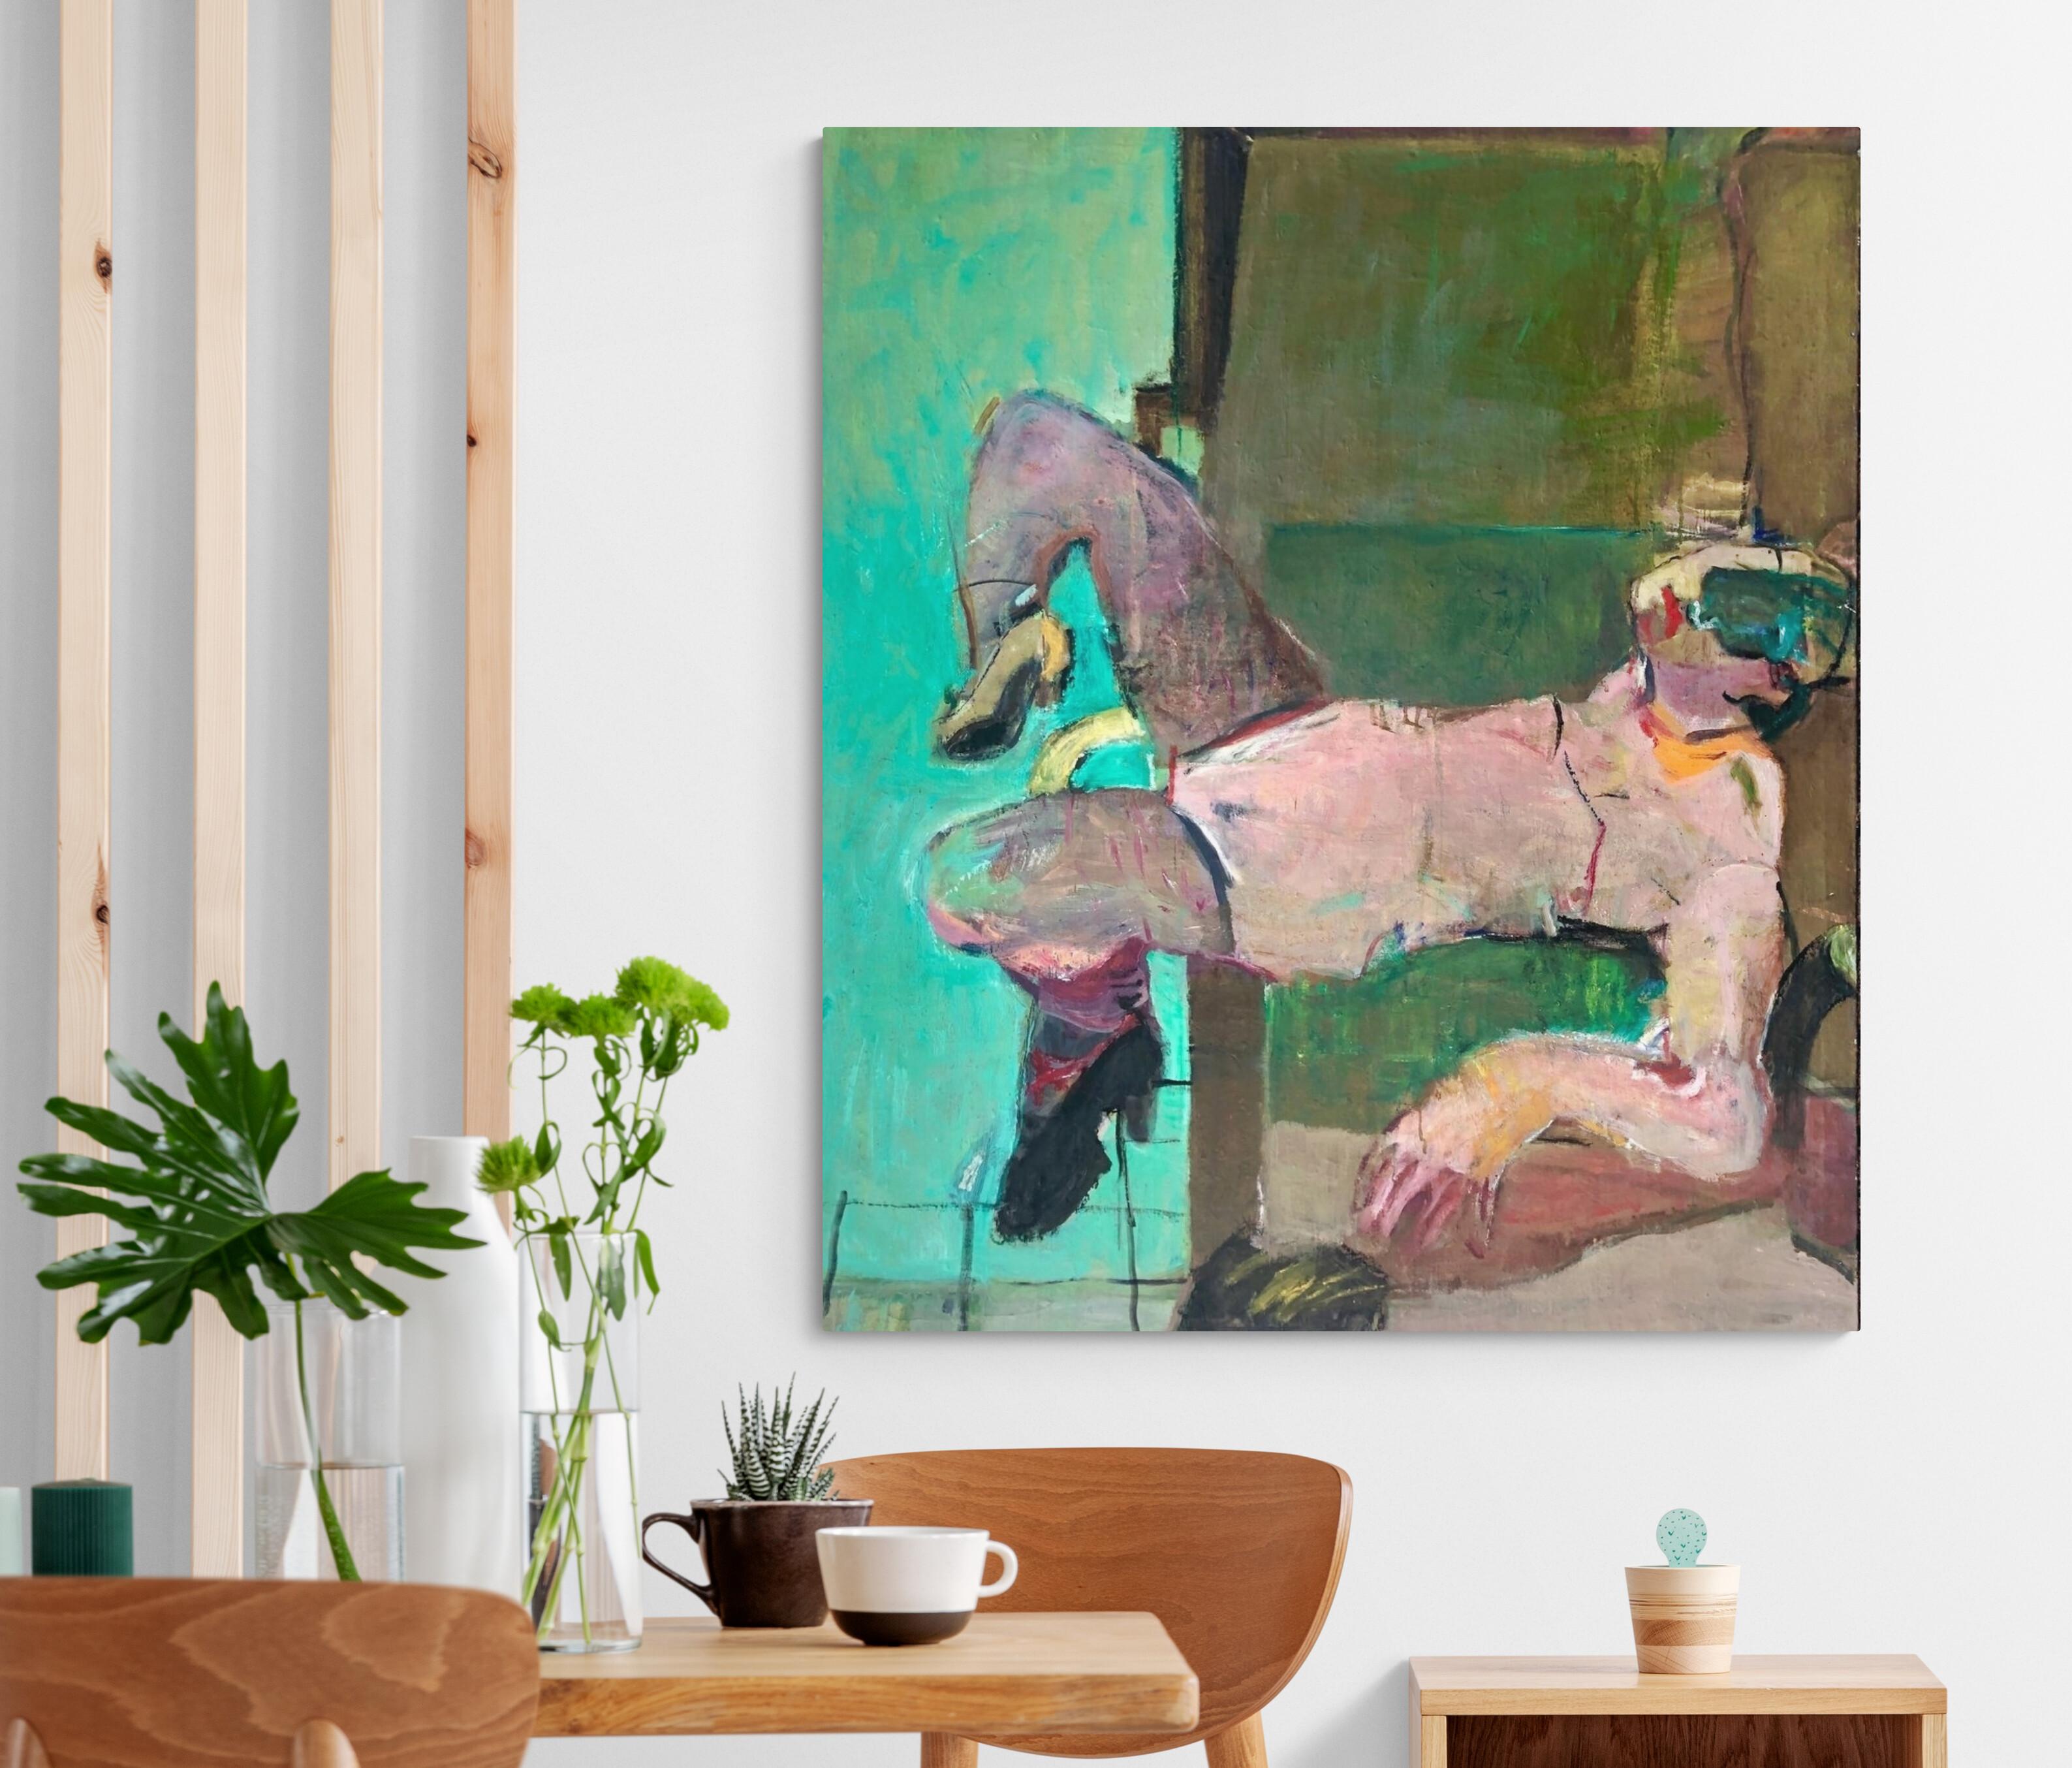 Green Expressive Abstracted Figurative Painting on Canvas 